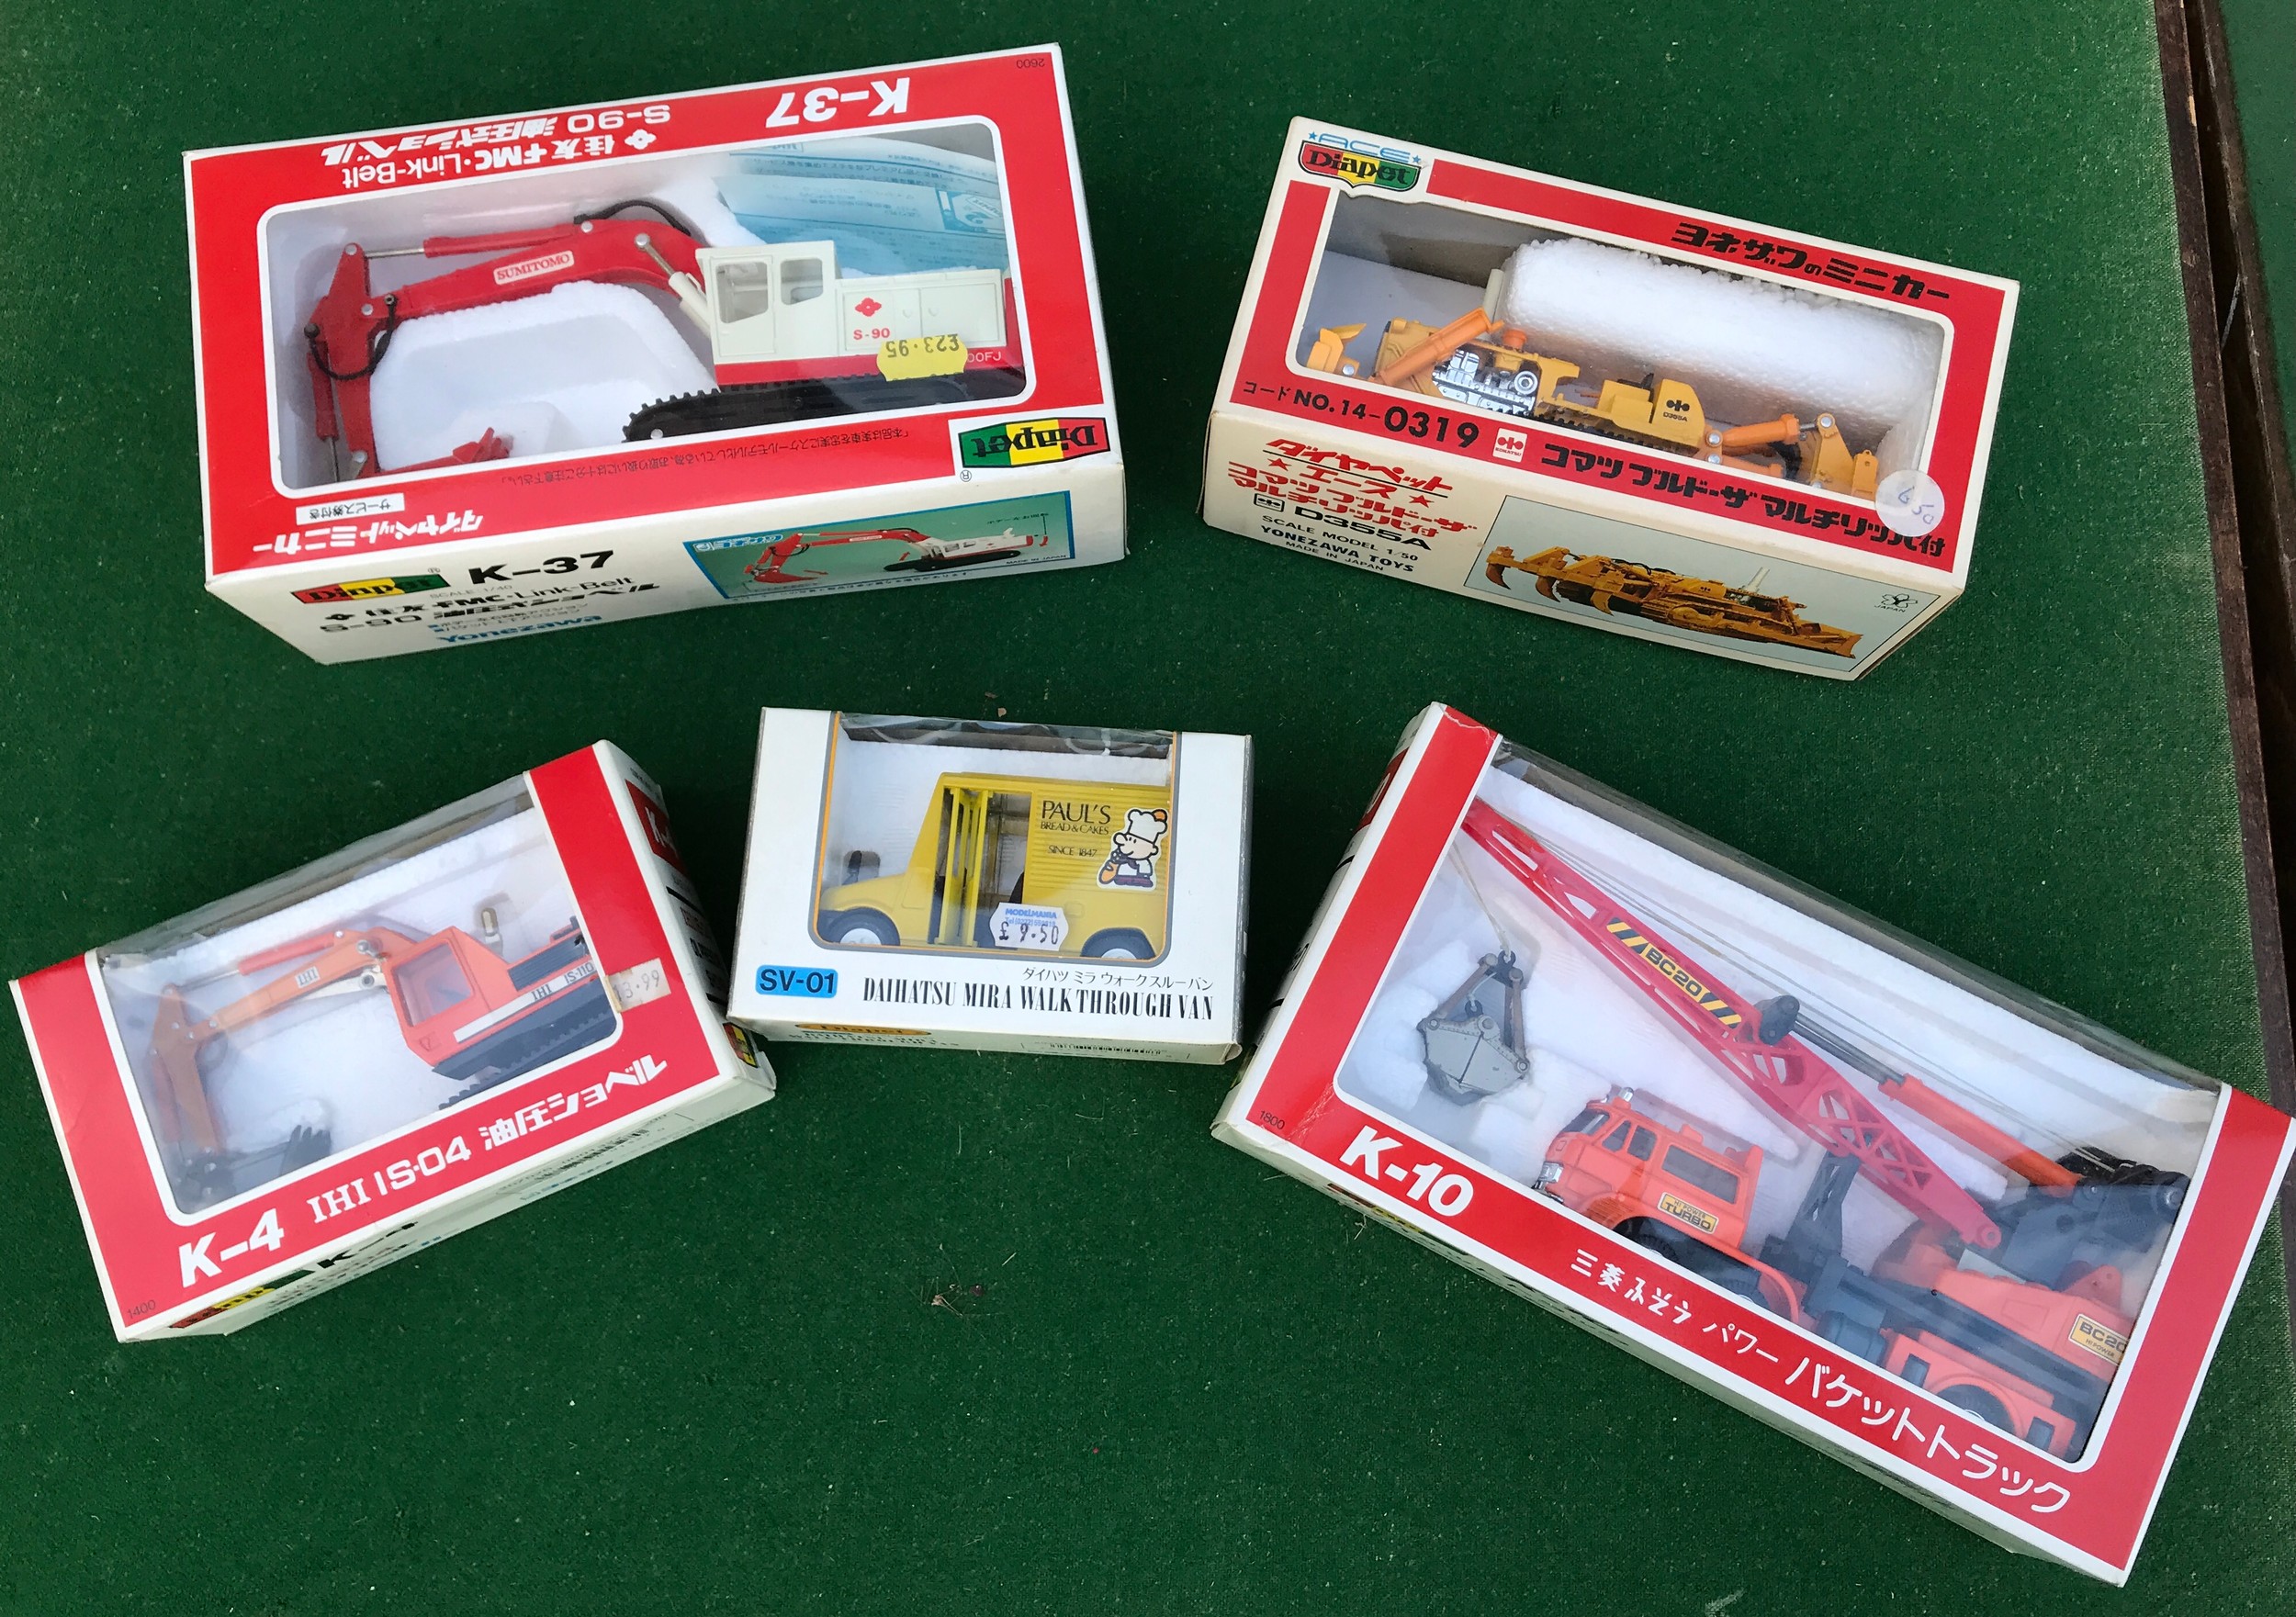 5 x Diapet diecast models to include 01723 K-10 Mitsubishi Fuso Power Bucket Truck, 01482 K-37 S-